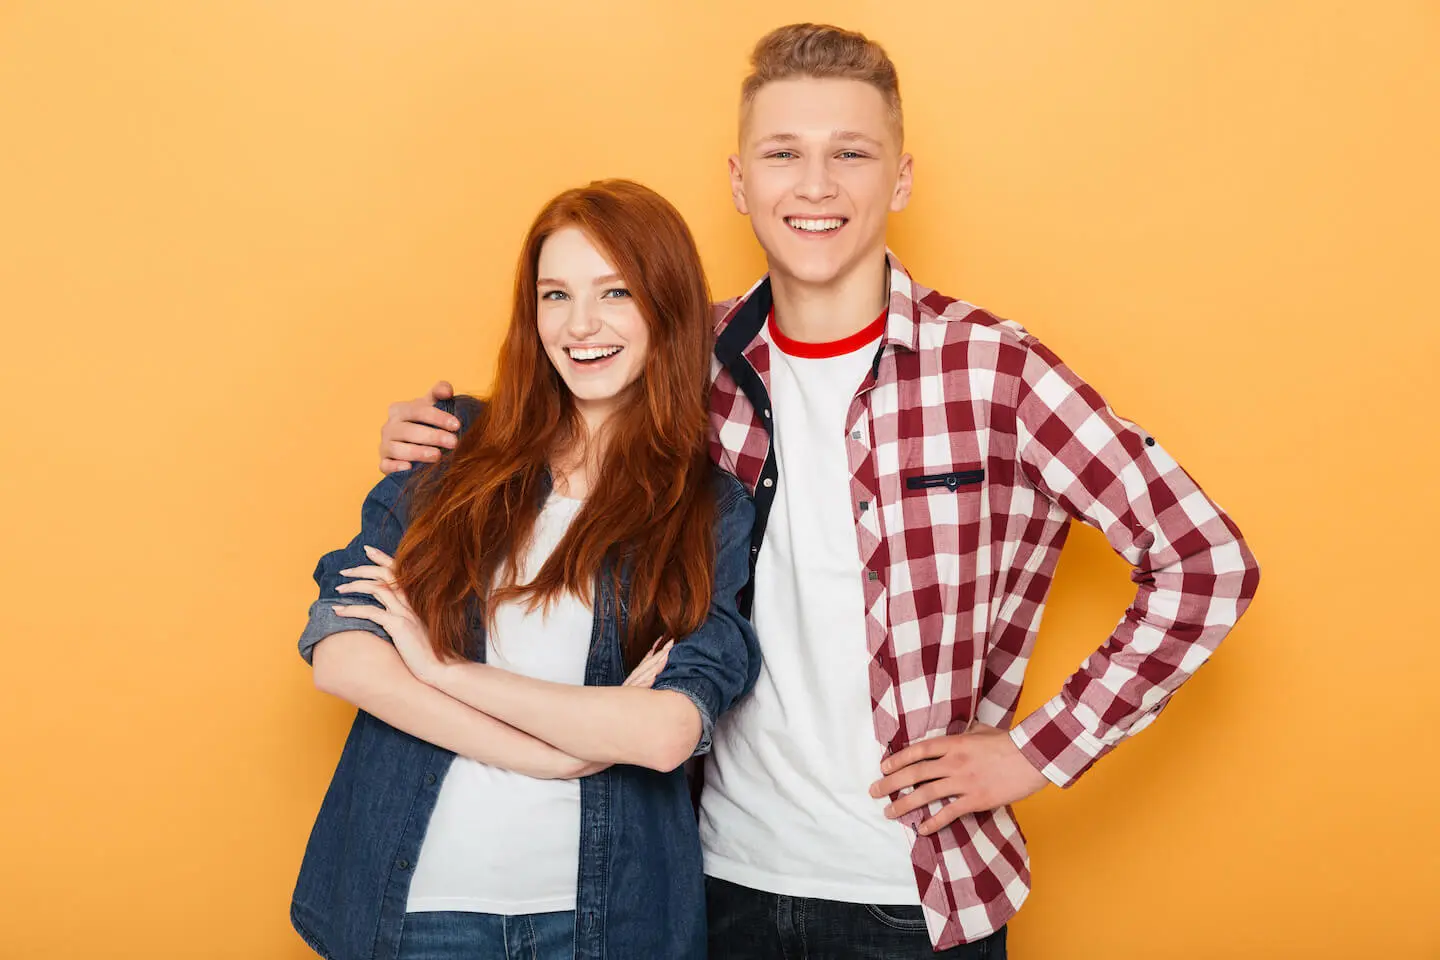 Two smiling teens stand together in front of an orange background